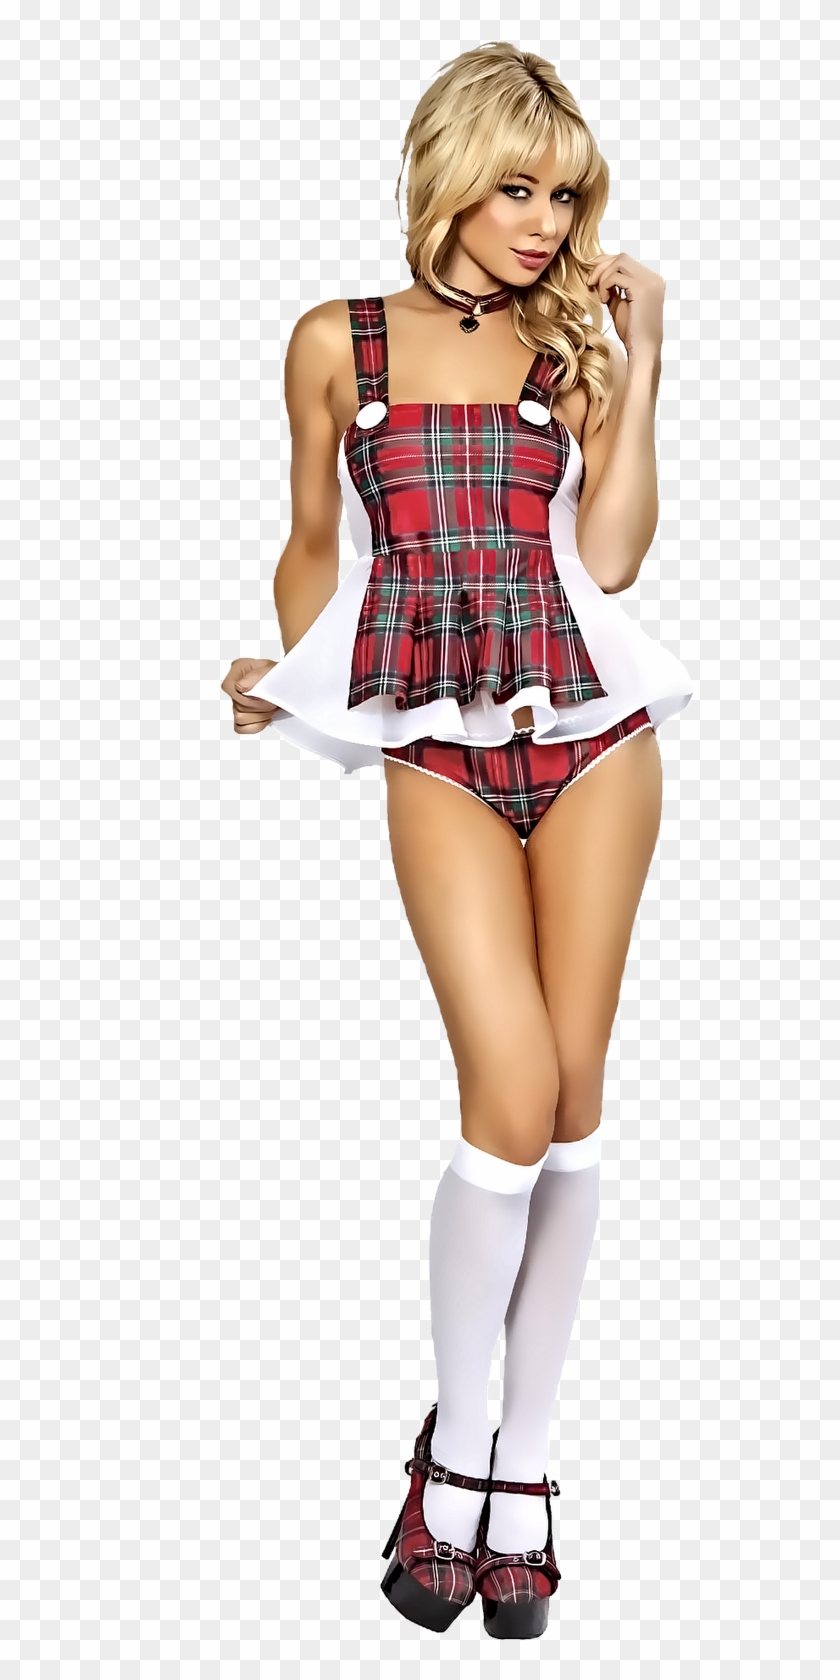 Sexy Woman Girl Png Image - Girls In Schoolgirl Outfit #1280378